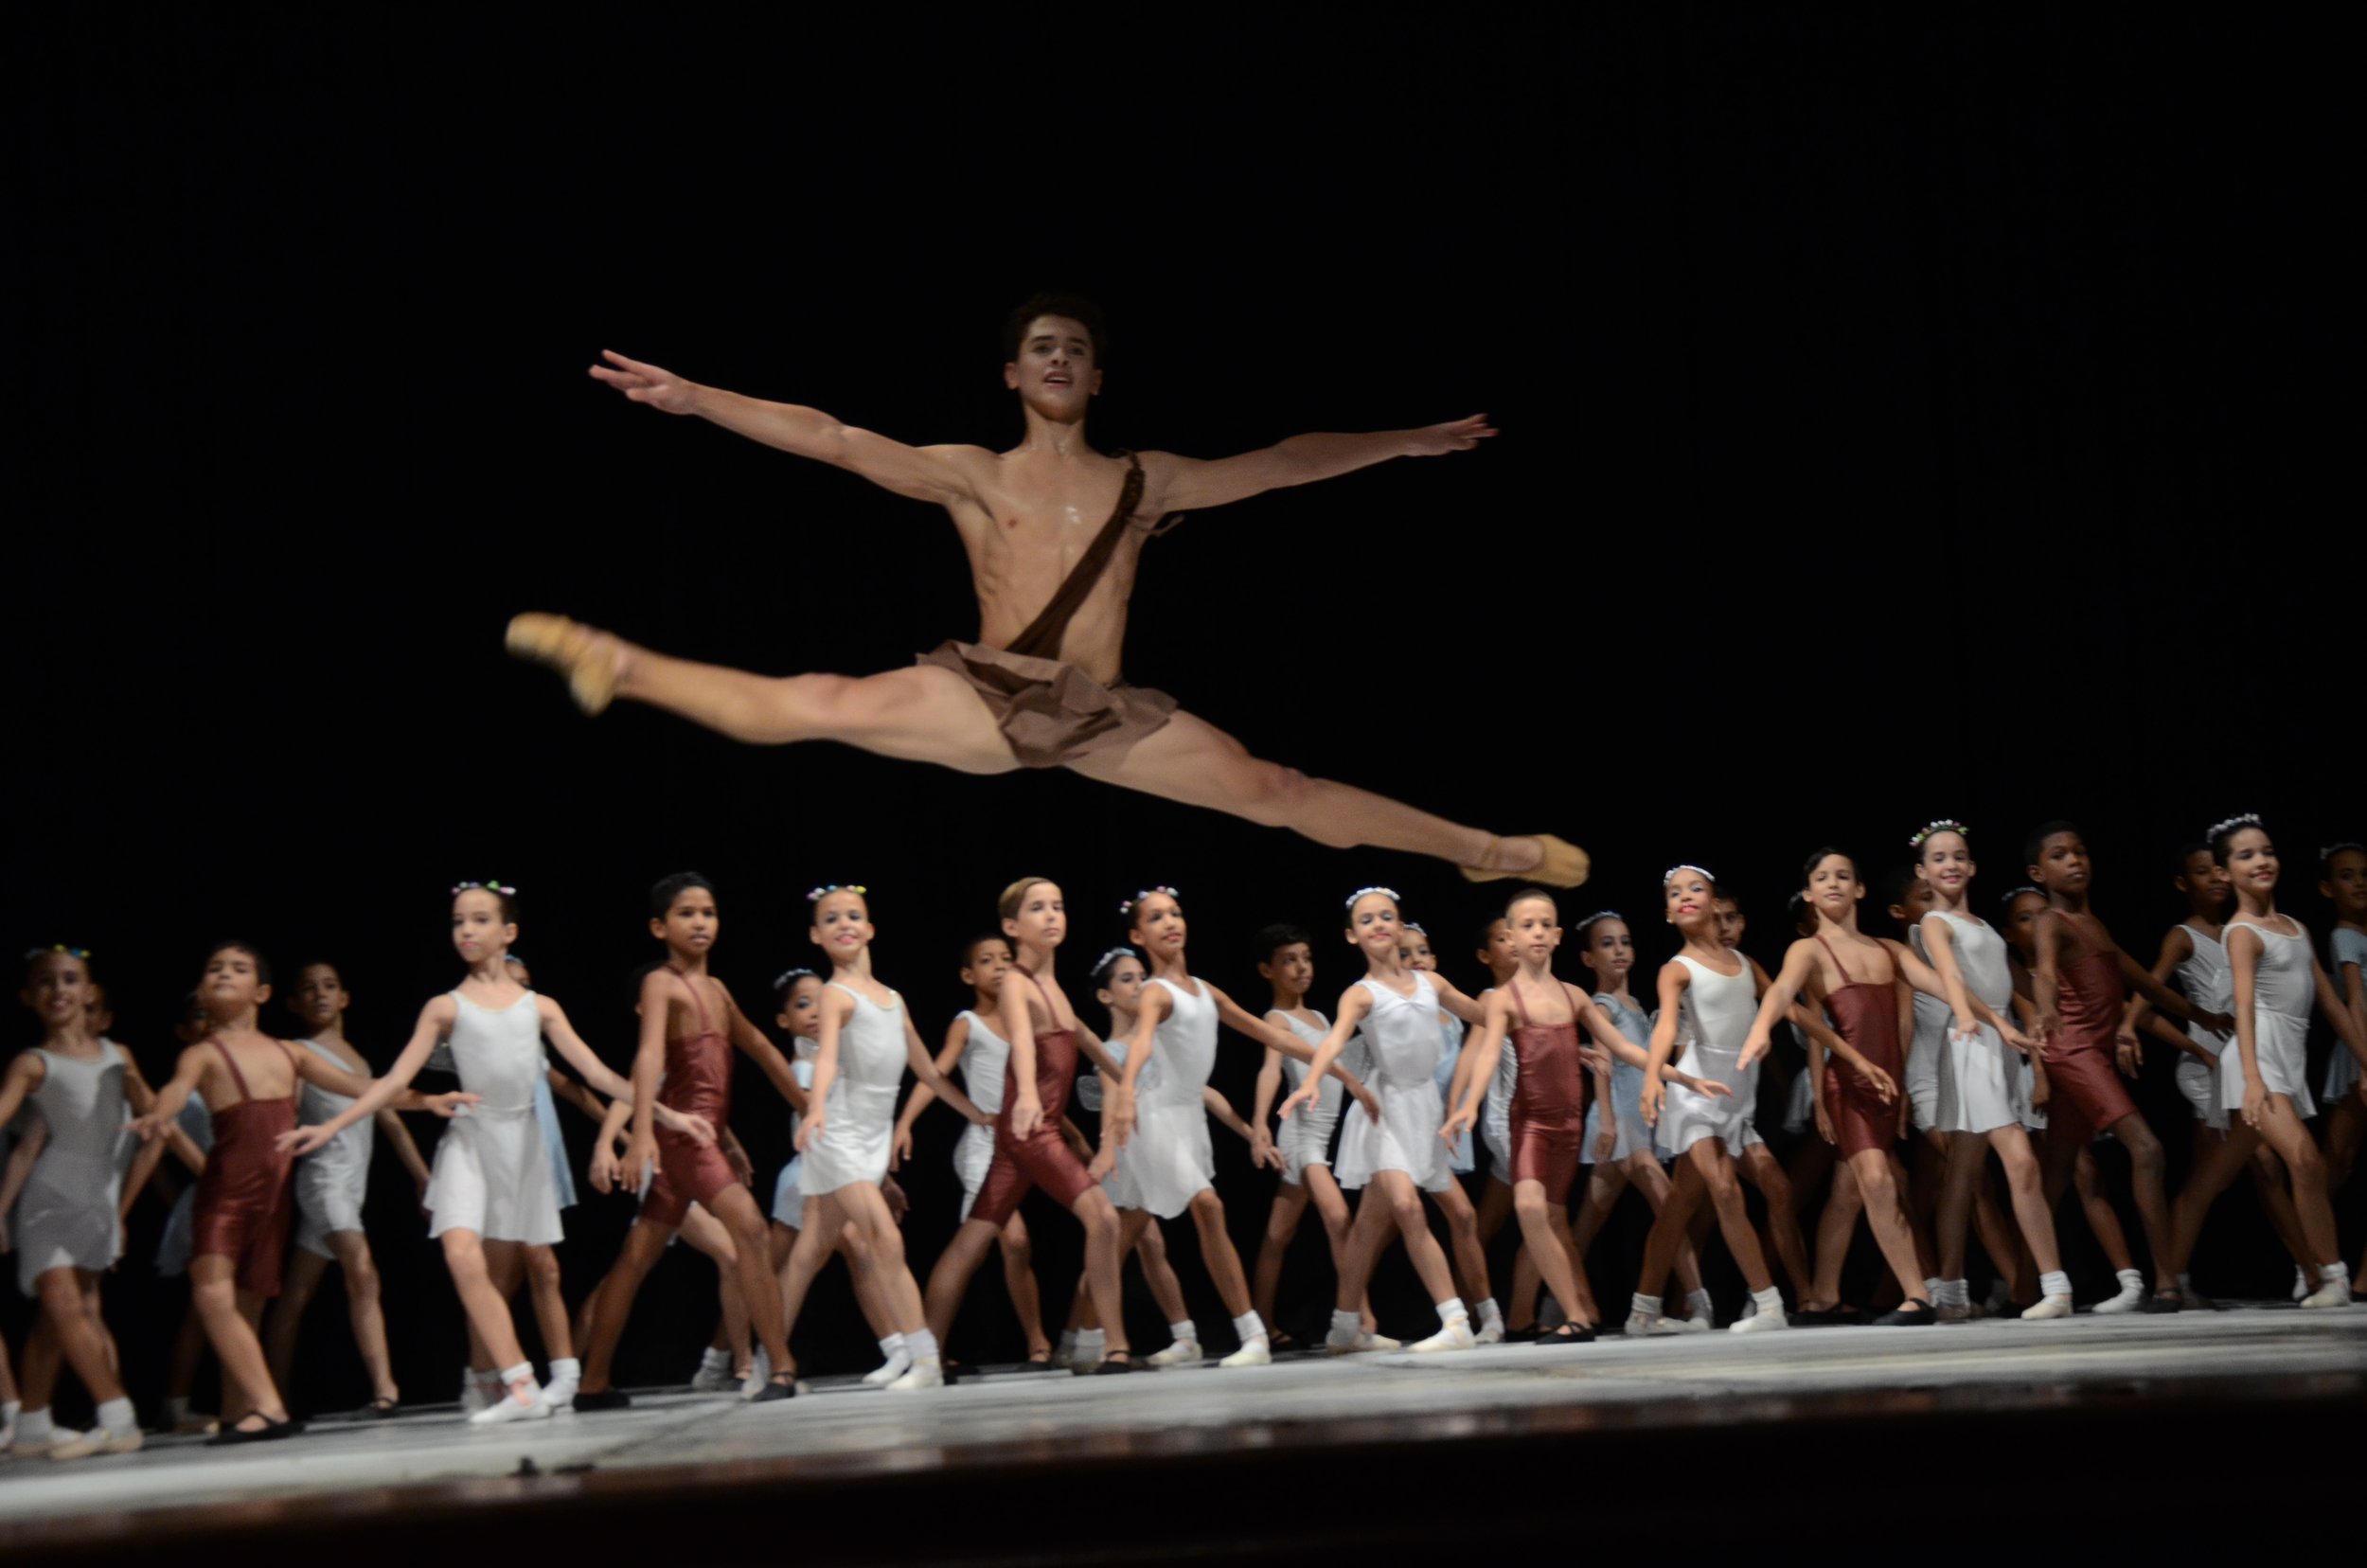 Alexis and his fellow students of the National Ballet School of Cuba 11 © Indyca.JPG